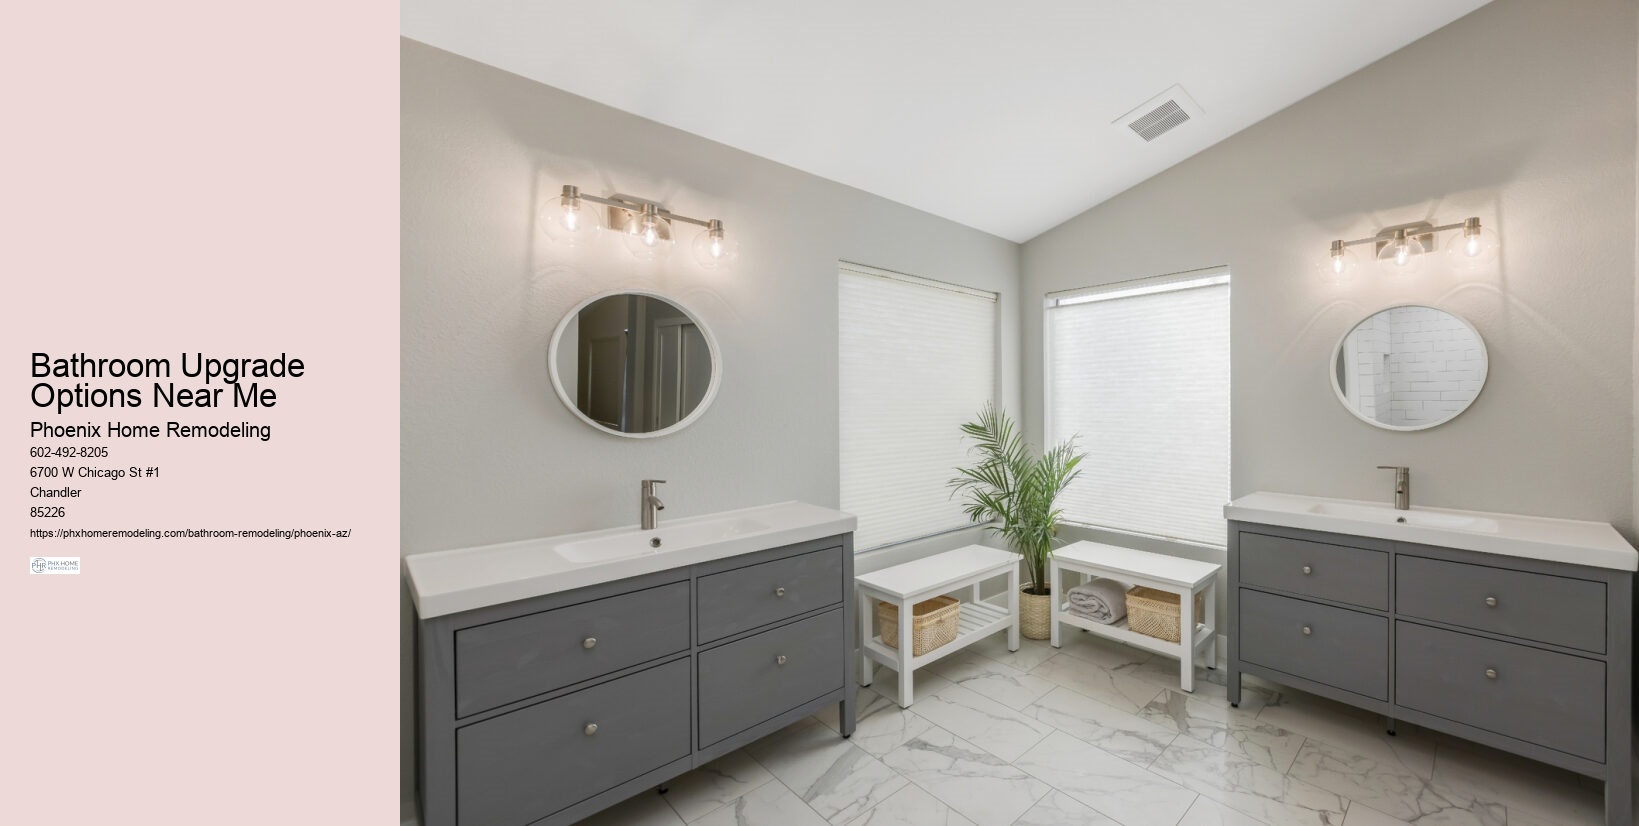 How long should a small bathroom remodel take